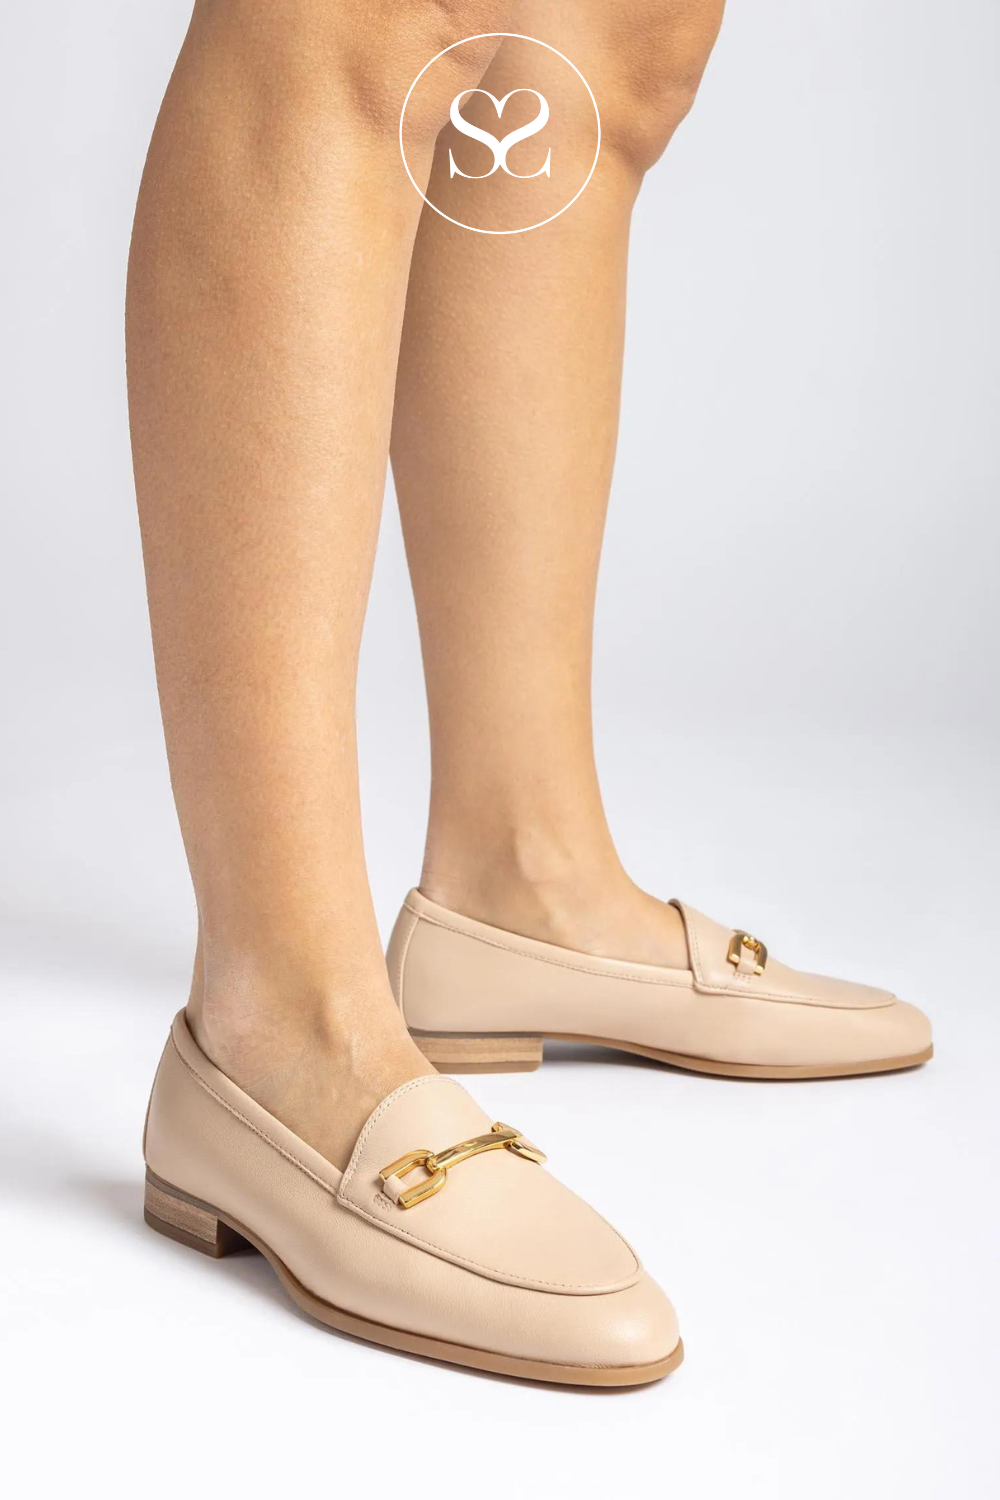 UNISA DALCY NUDE LEATHER FLAT LOAFERS